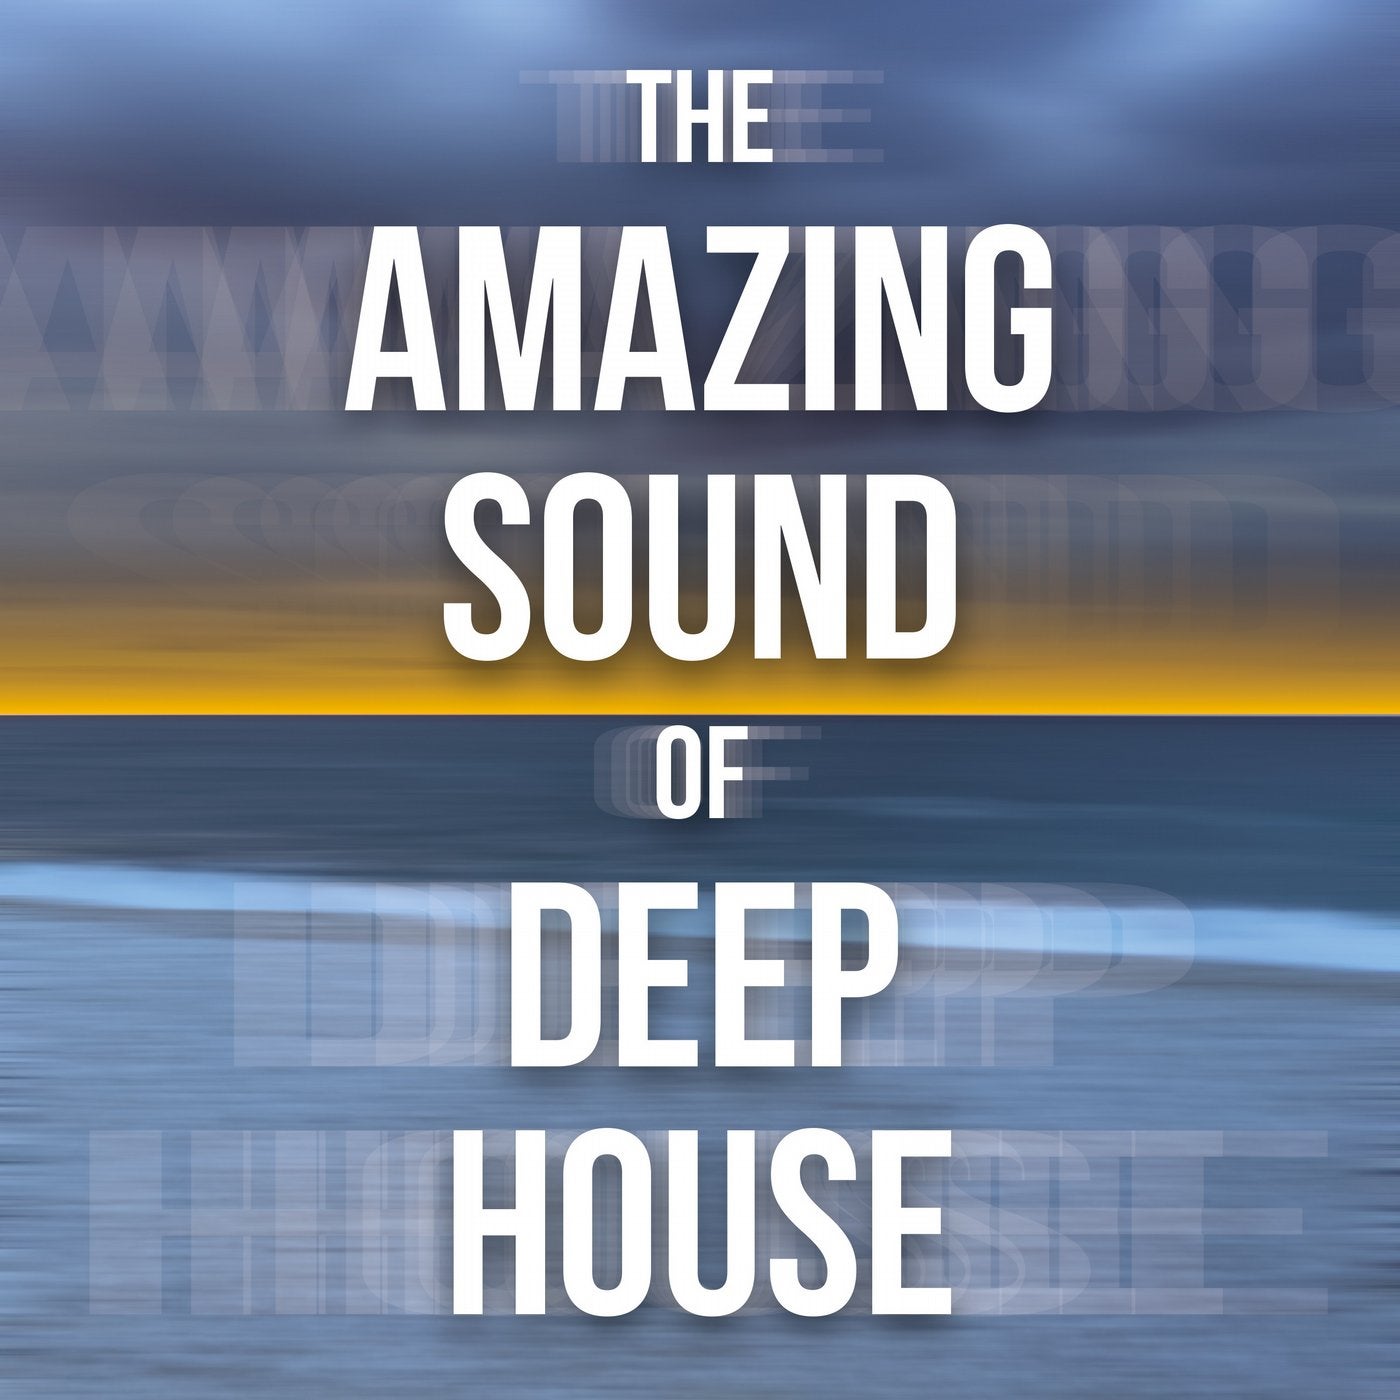 The Amazing Sound of Deep House